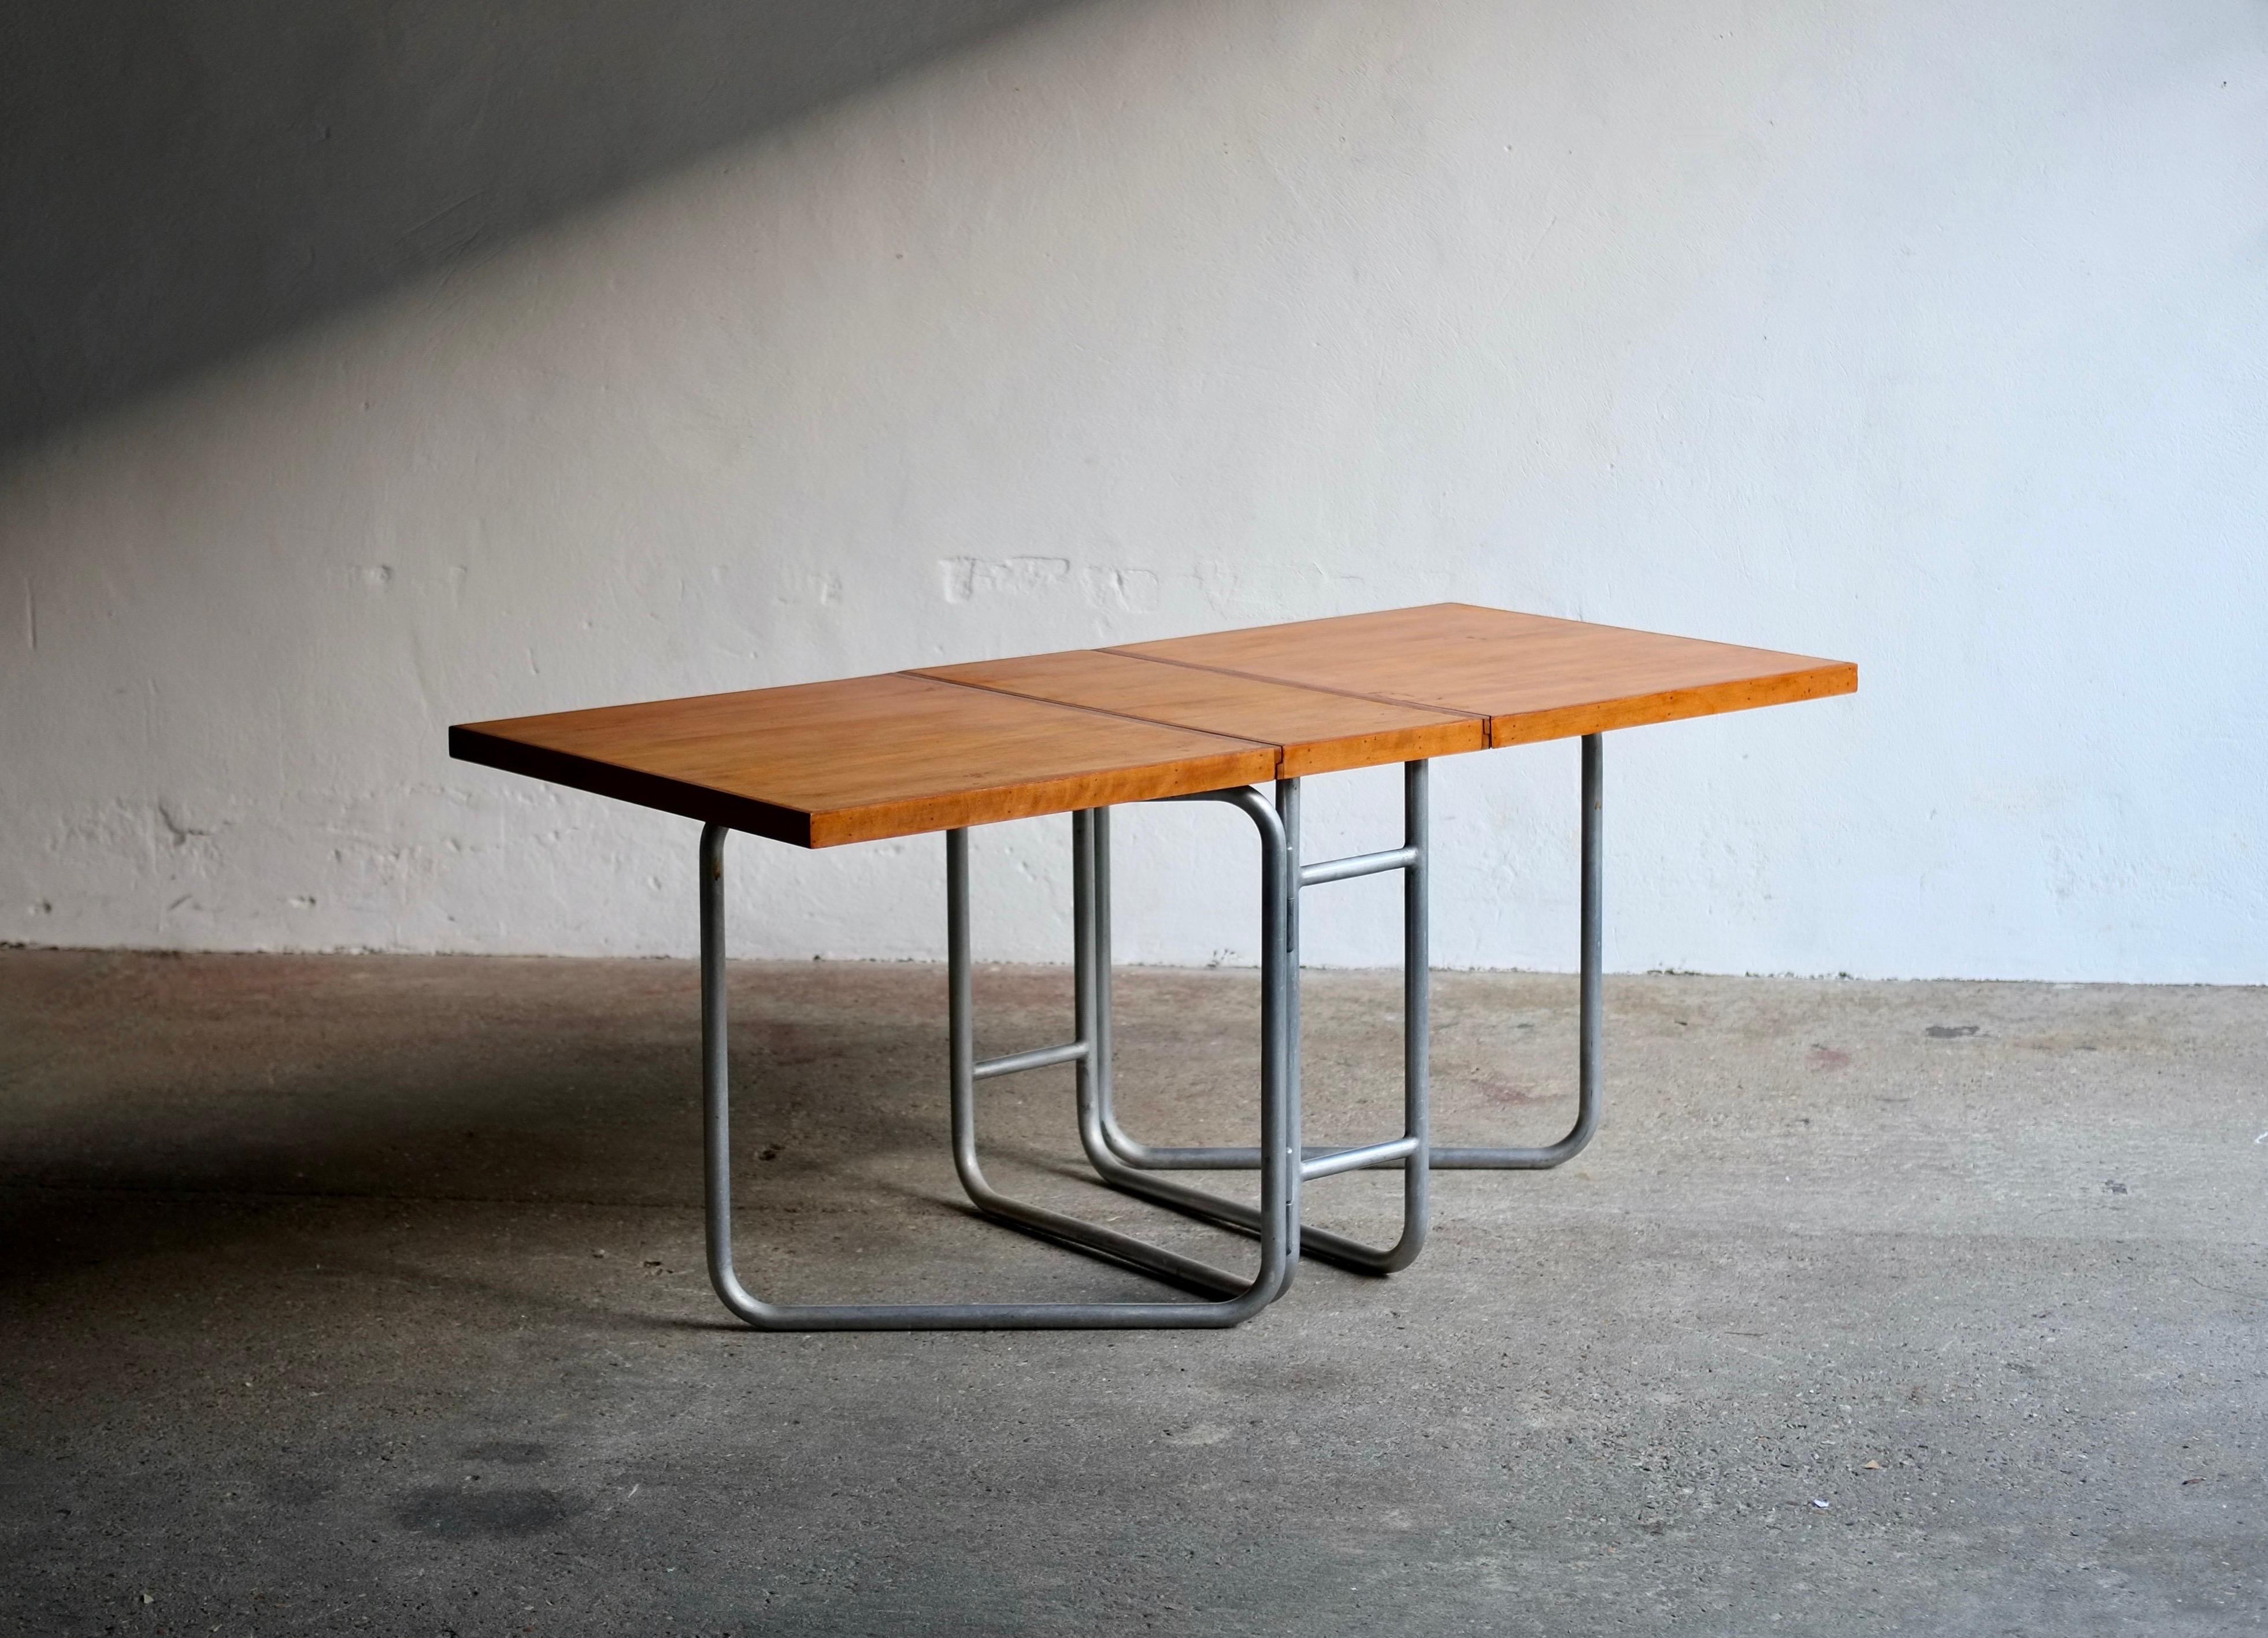 A Folding service table designed by Gil Ponti for the villa 